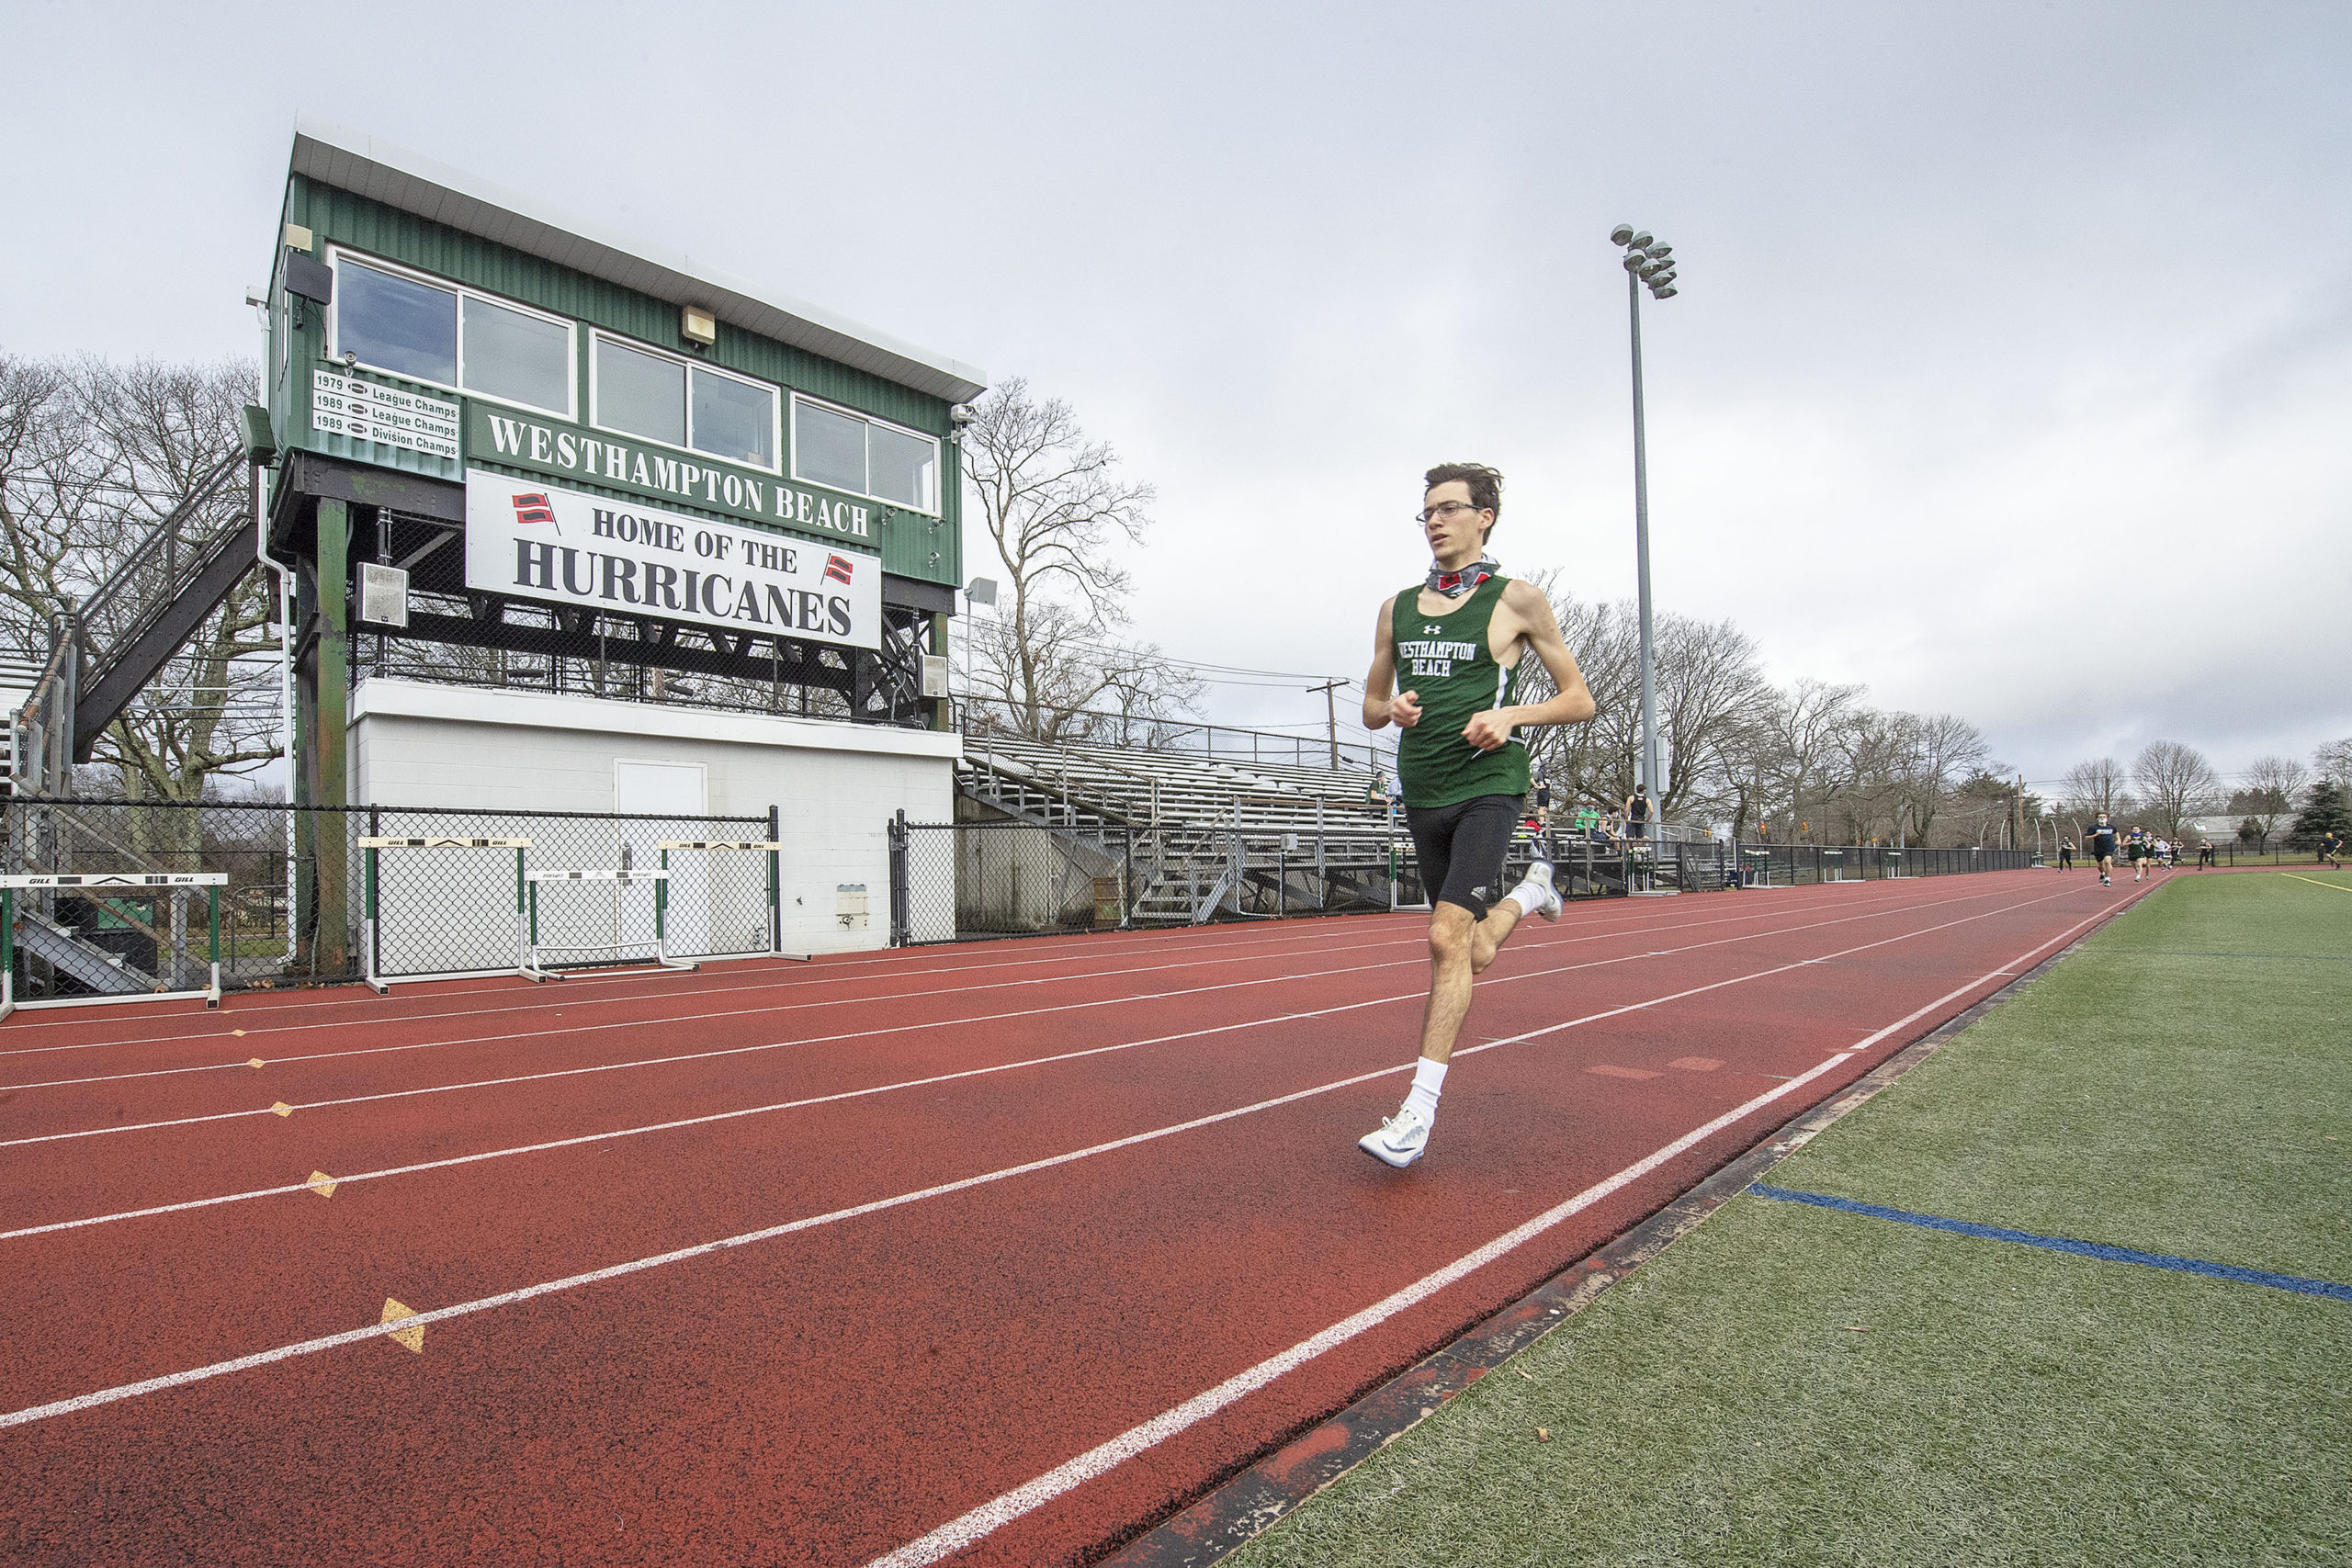 Gavin Ehlers leads the field by a large margin during the 1600 meter race as the Westhampton Beach boys track team competes against the team from Rocky Point at Westhampton Beach High School on Saturday.       MICHAEL HELLER